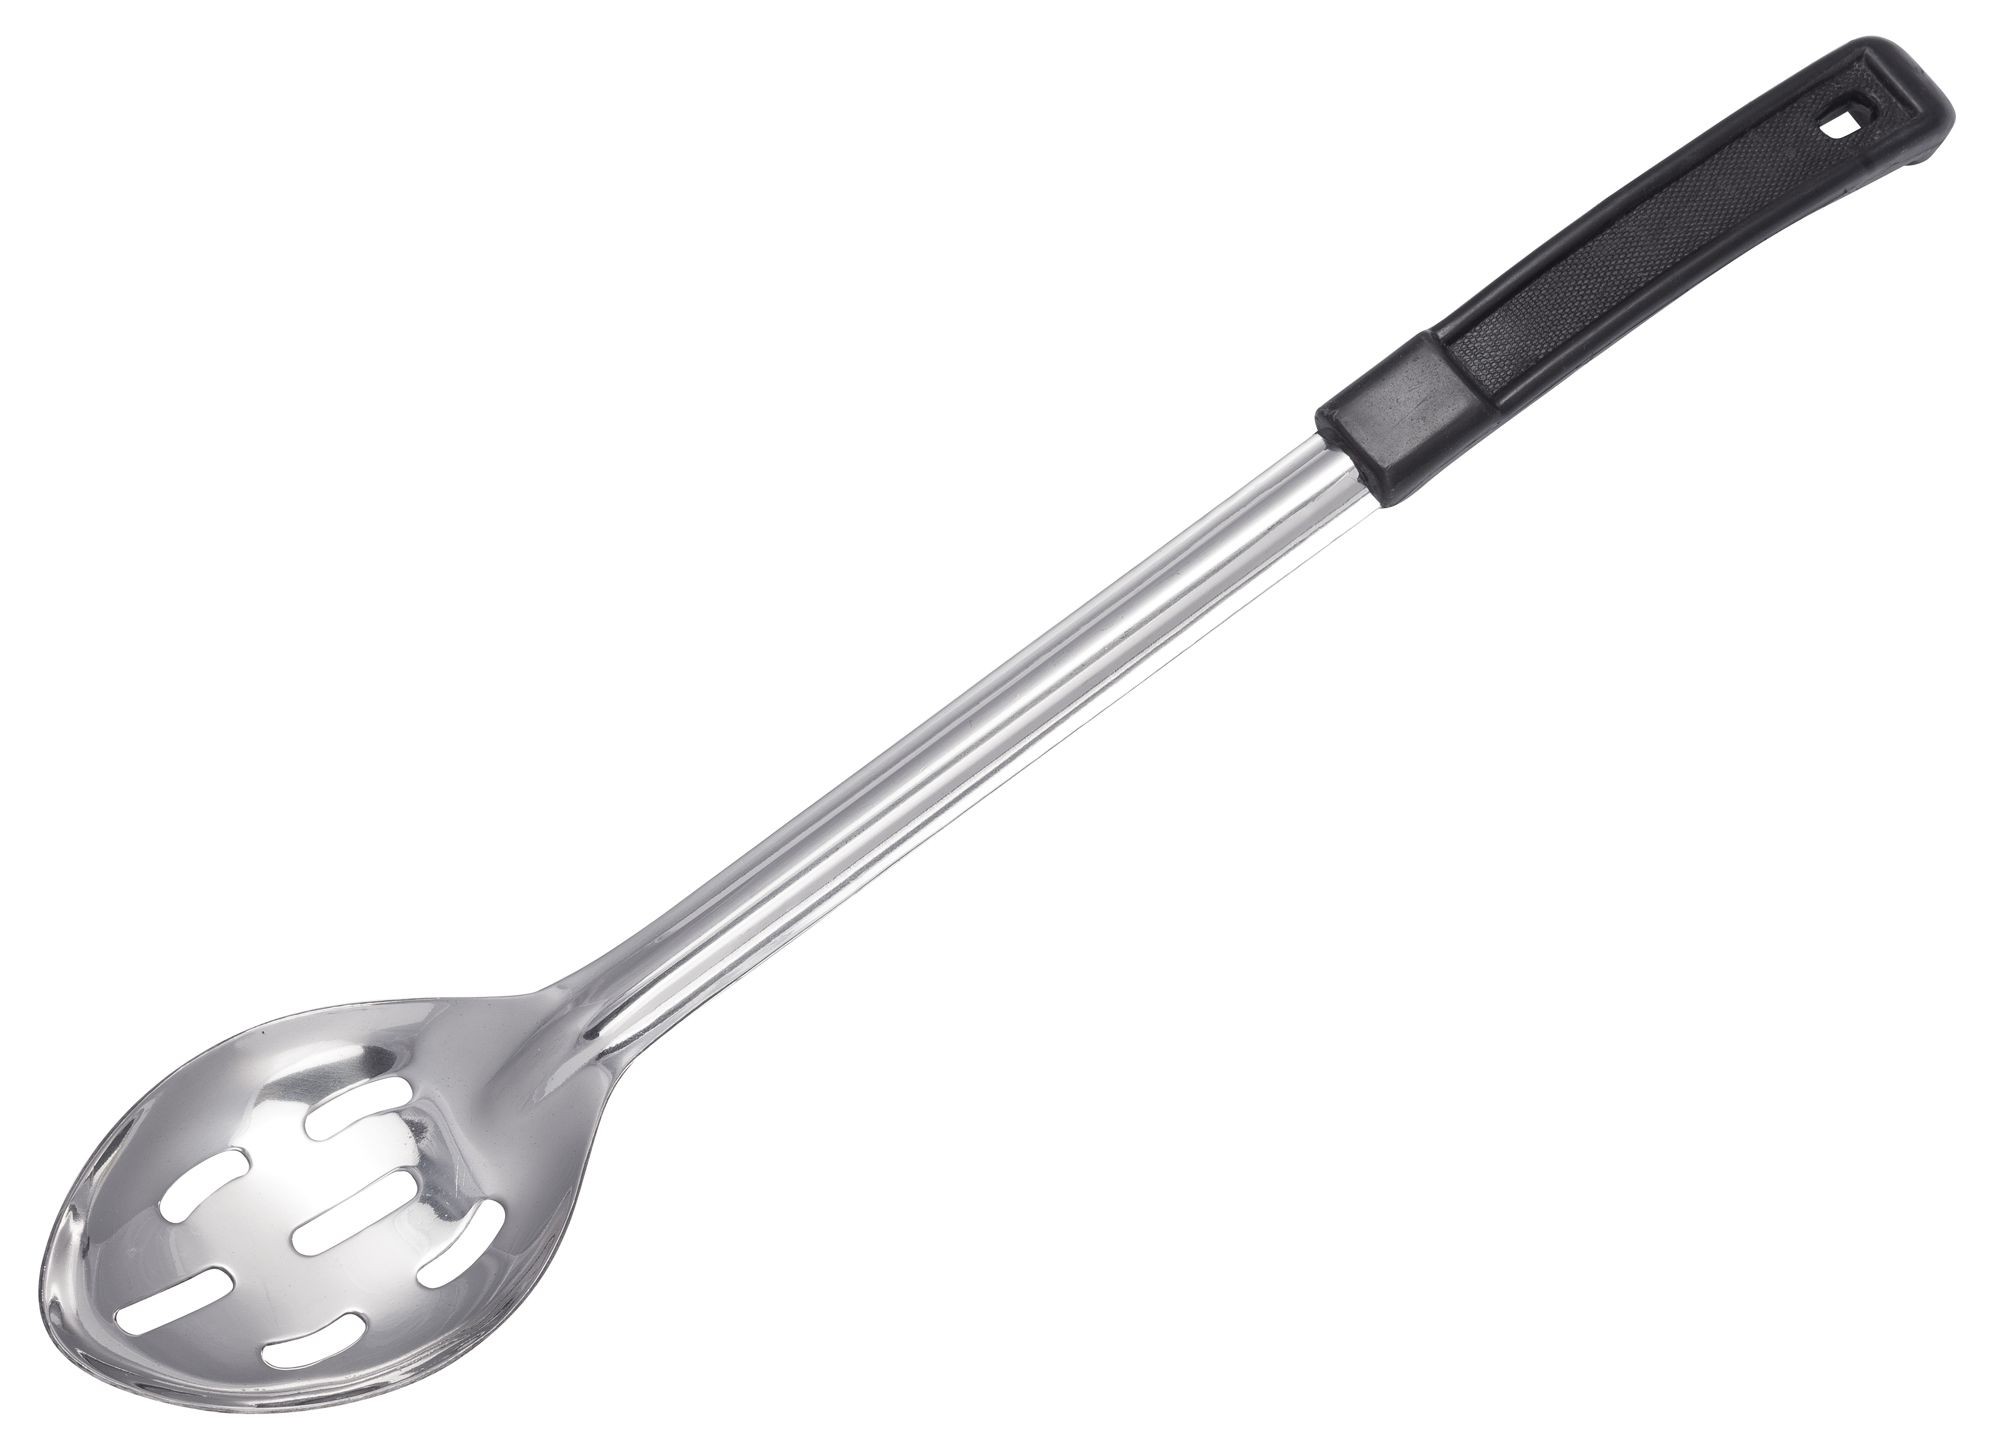 USA SELLER  BASTING/SERVING SPOON SOLID 13" STAINLESS STEEL 